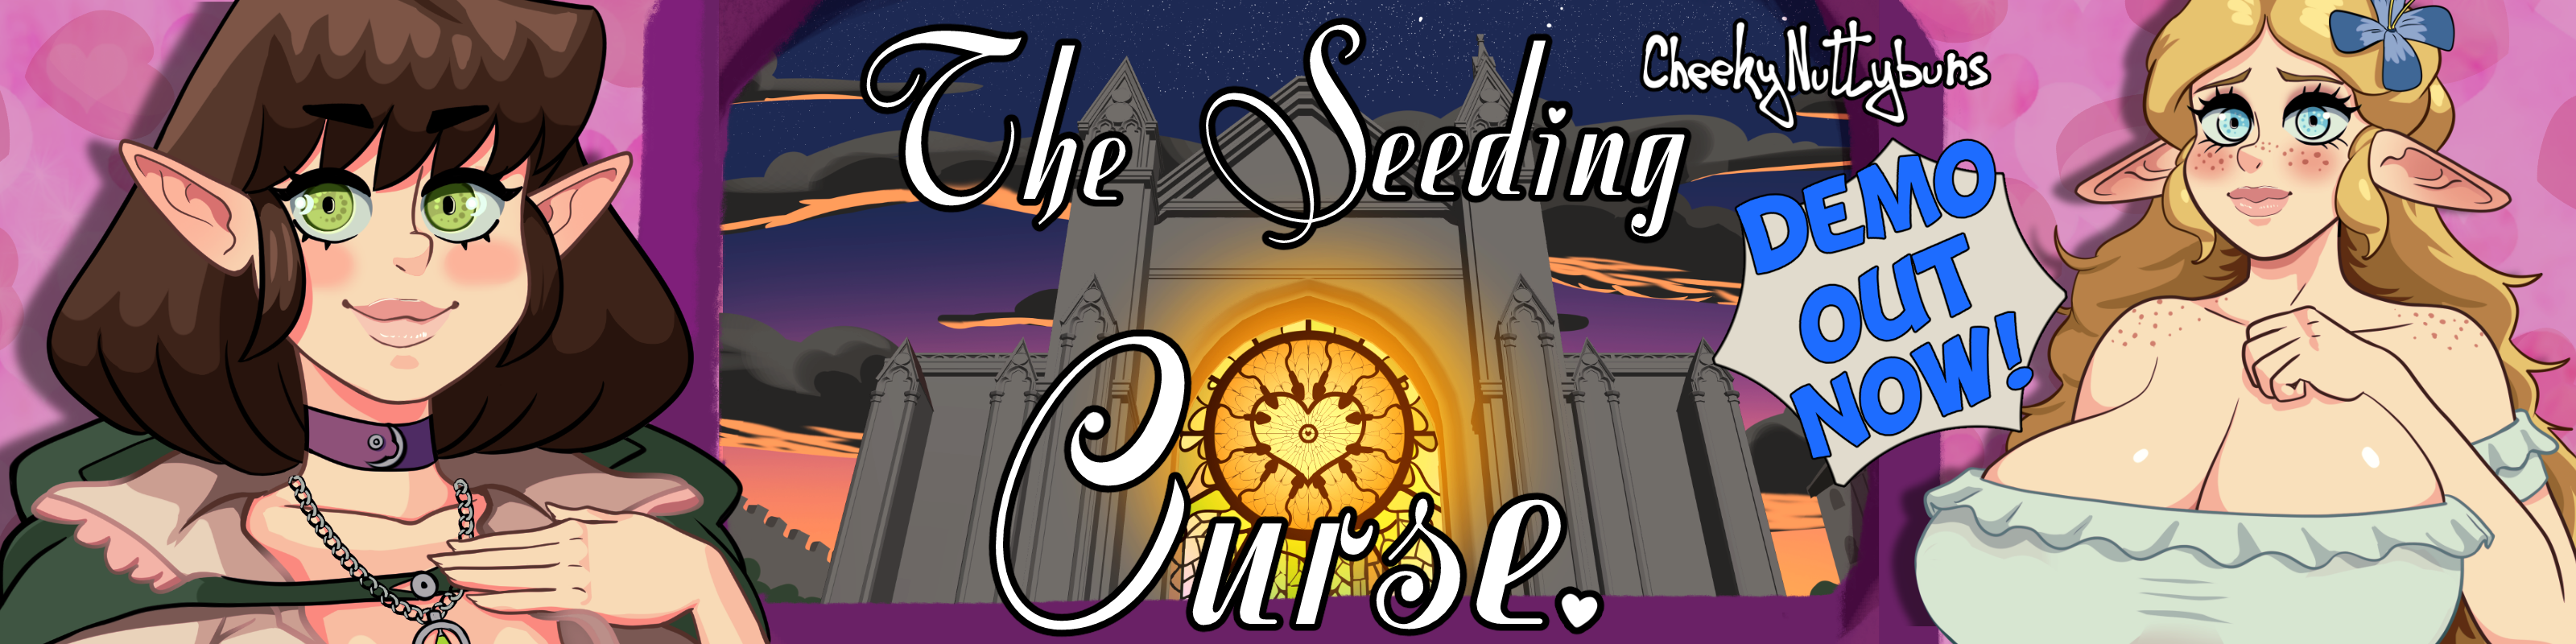 The Seeding Curse poster